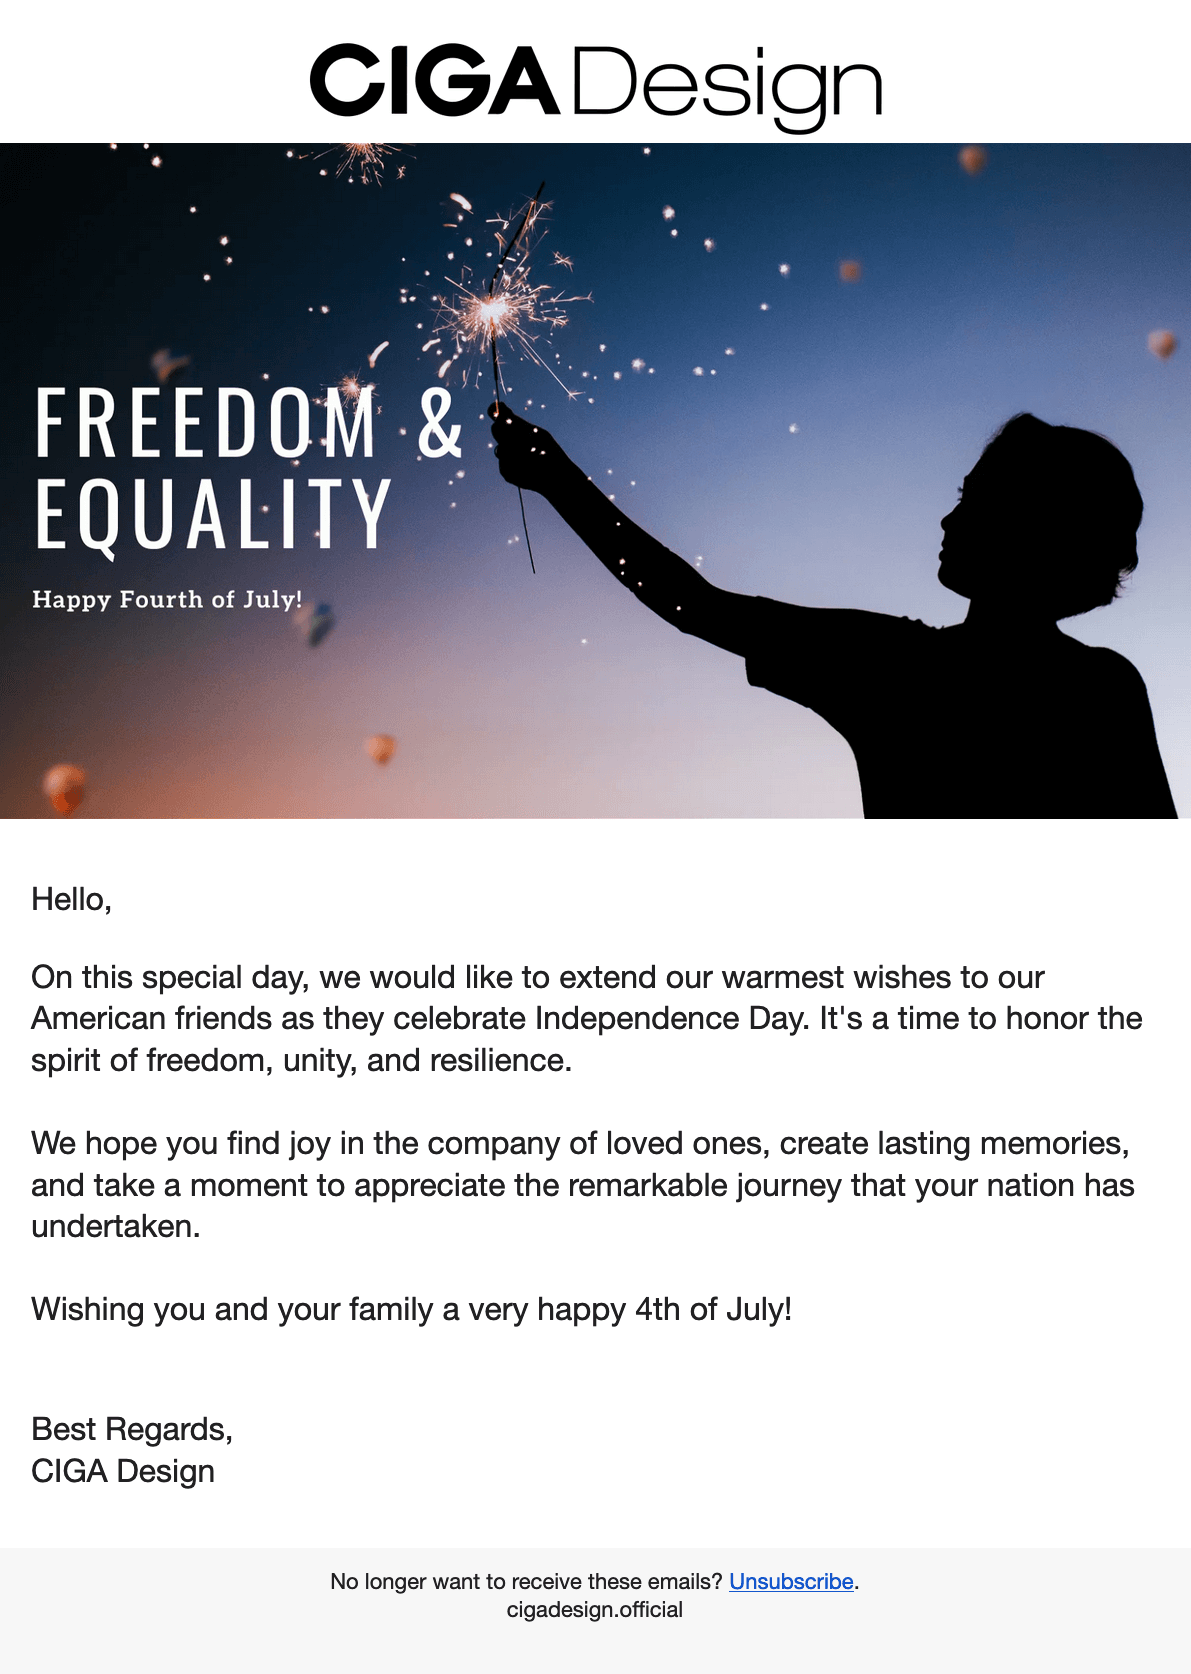 Independence Day email from CIGA Design with a banner image and a short congratulatory message that ends with “Wishing you and your family a very happy 4th of July!”